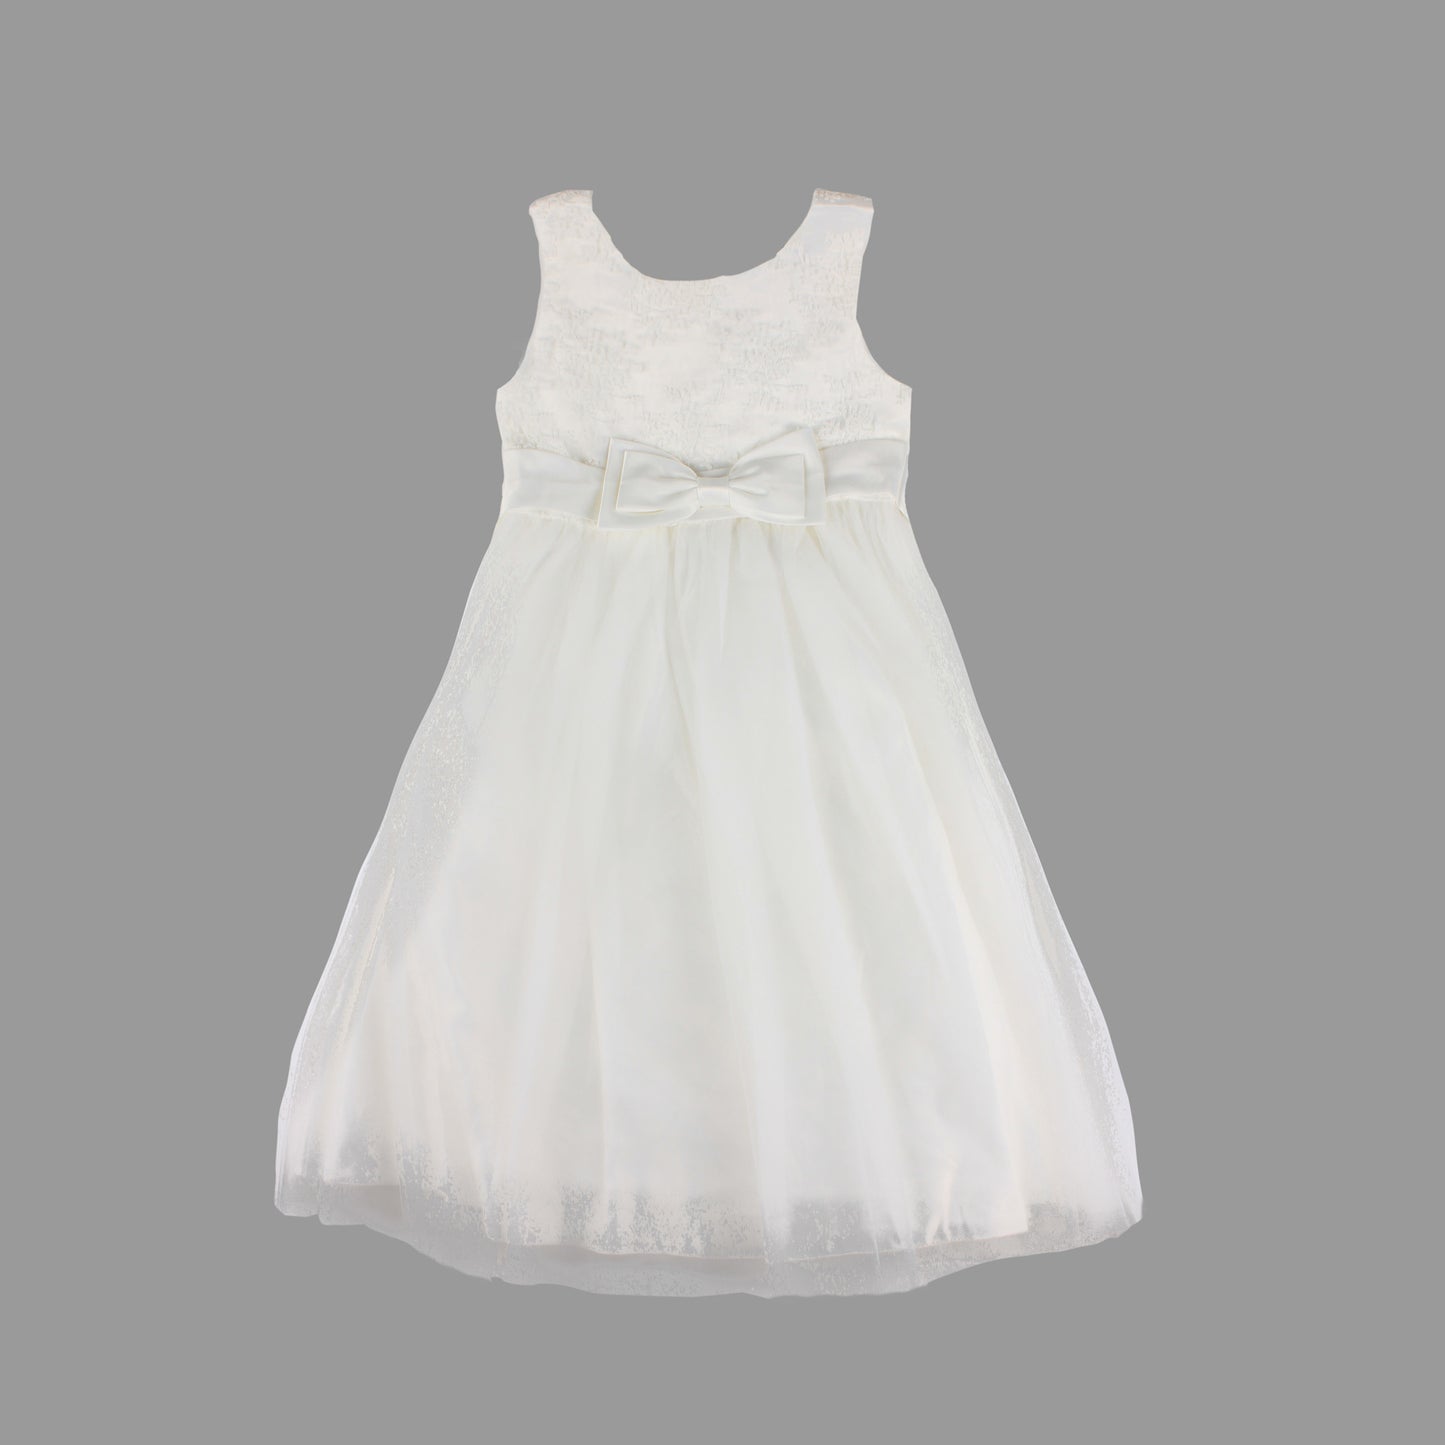 Girl Ivory Occasion Formal Dress With Bow 6-12